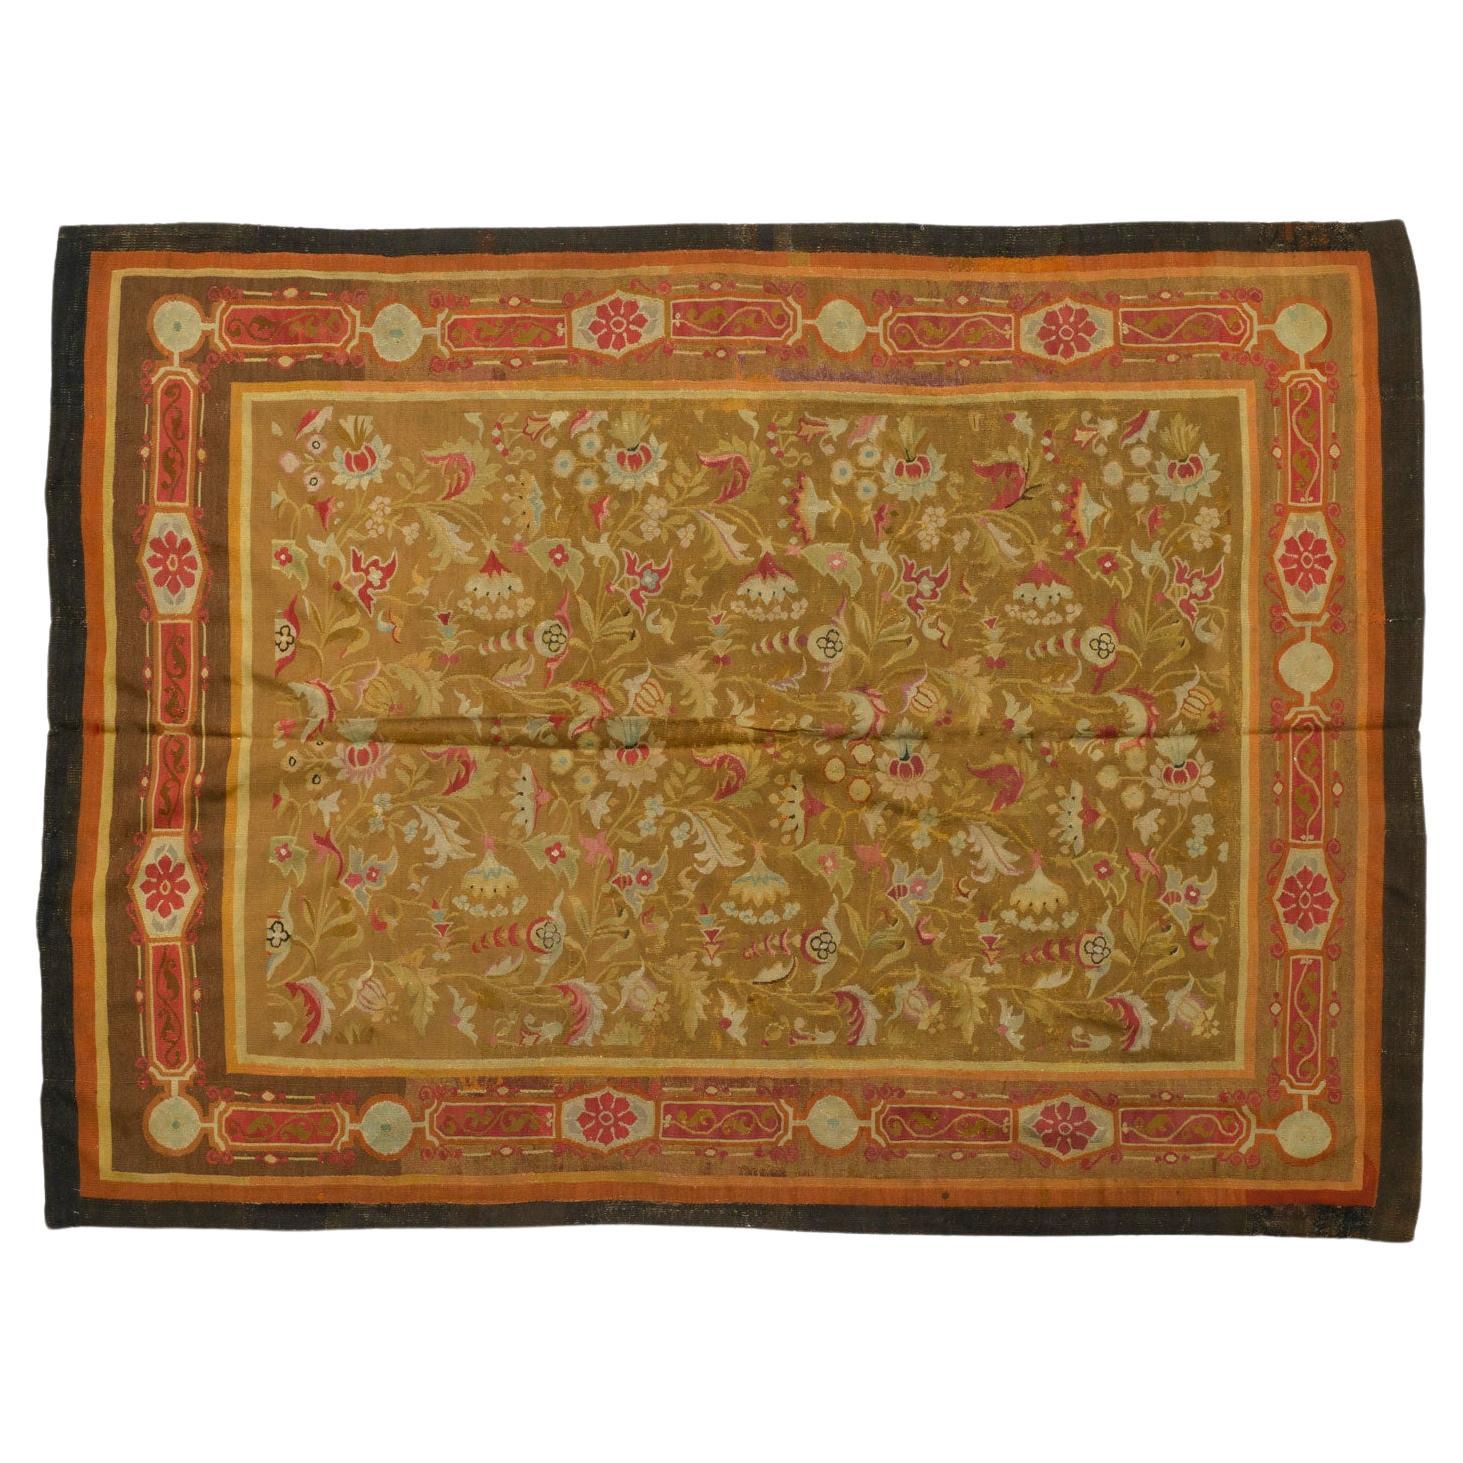 1800 France-Carpet Aubusson hand-woven wool For Sale